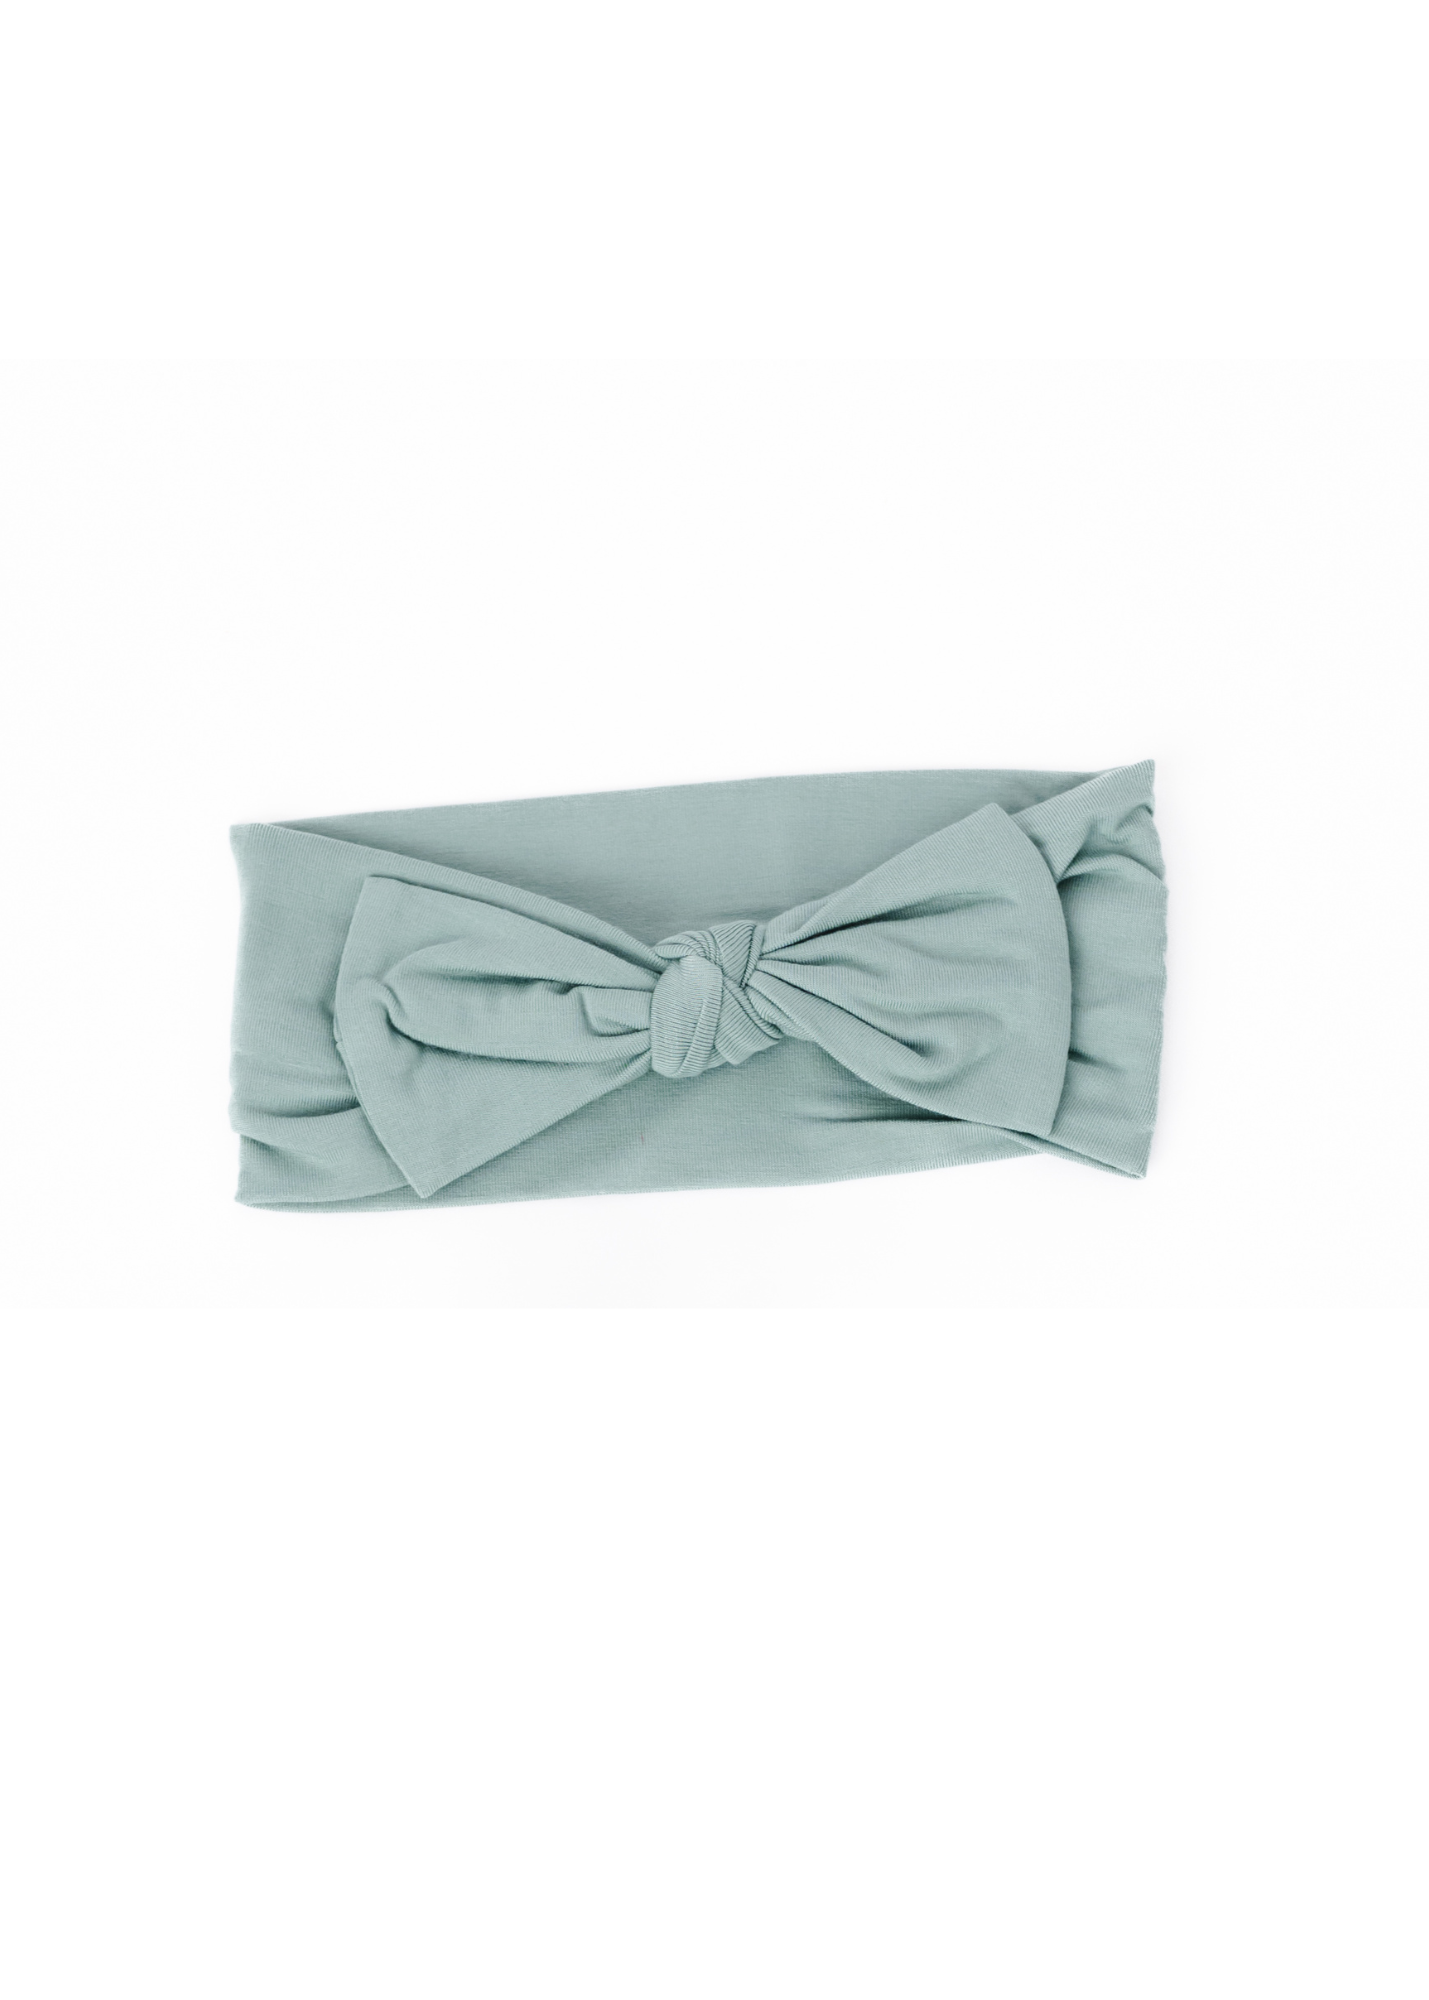 Teal Solid Color Hair Bow (Farm Collection)